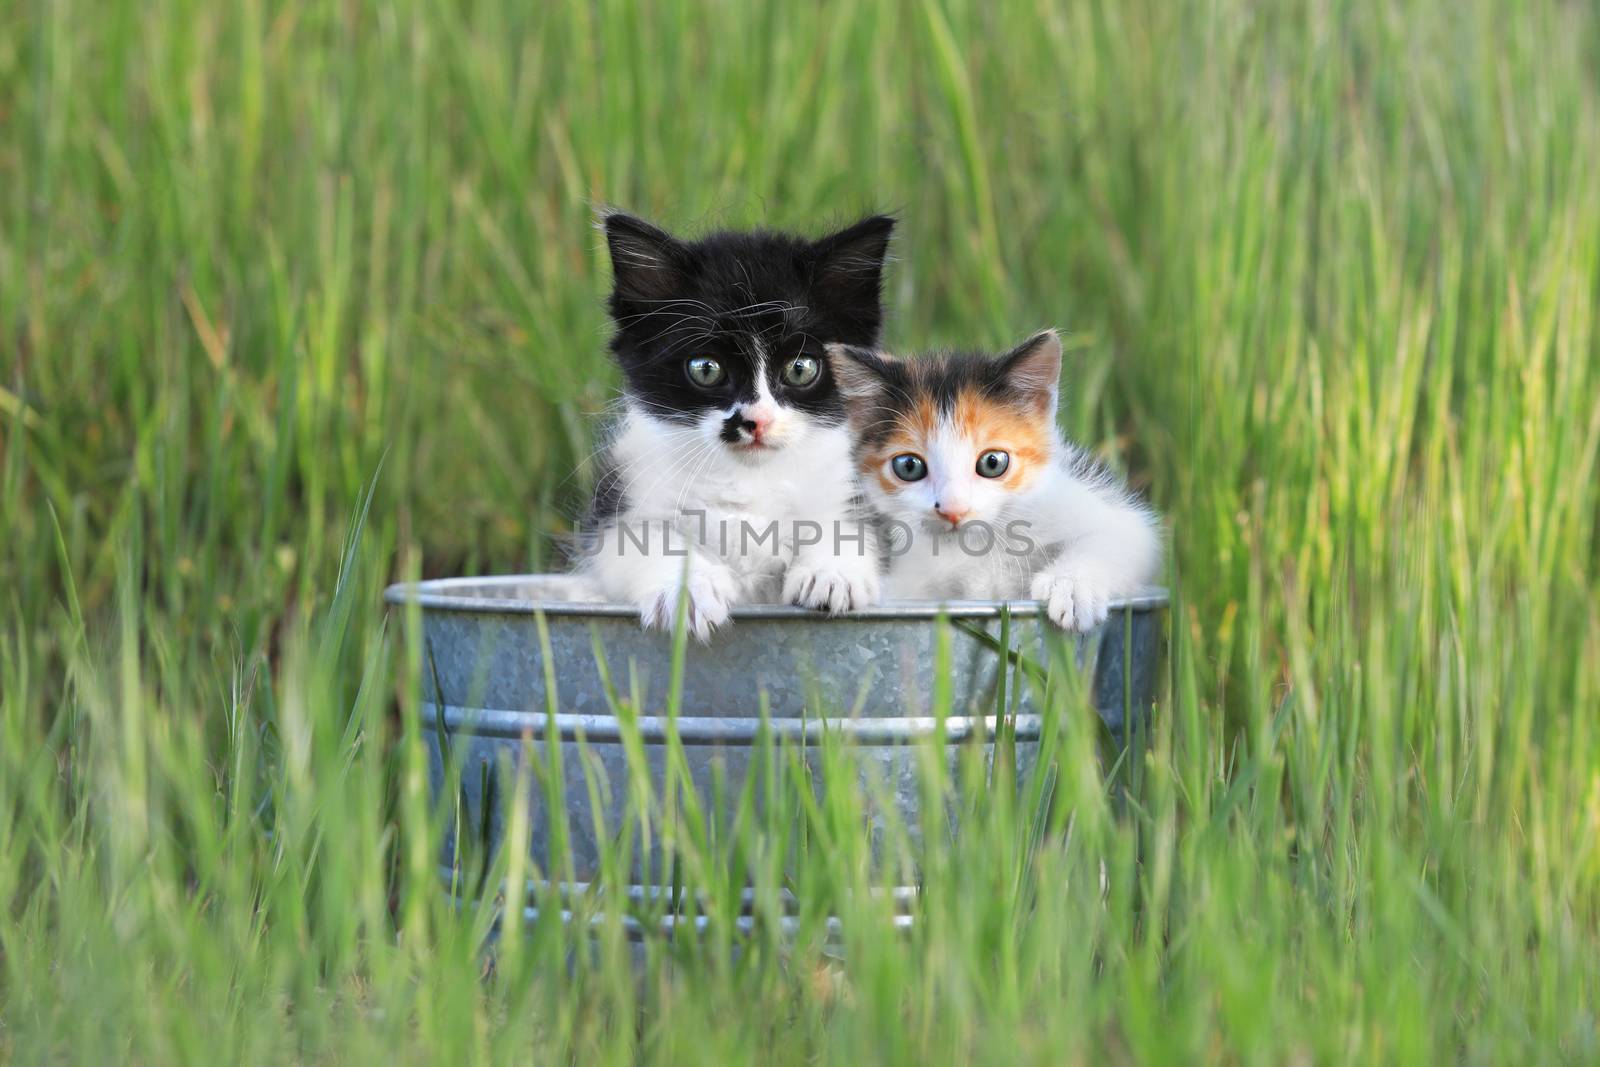 Kittens Outdoors in Tall Green Grass by tobkatrina